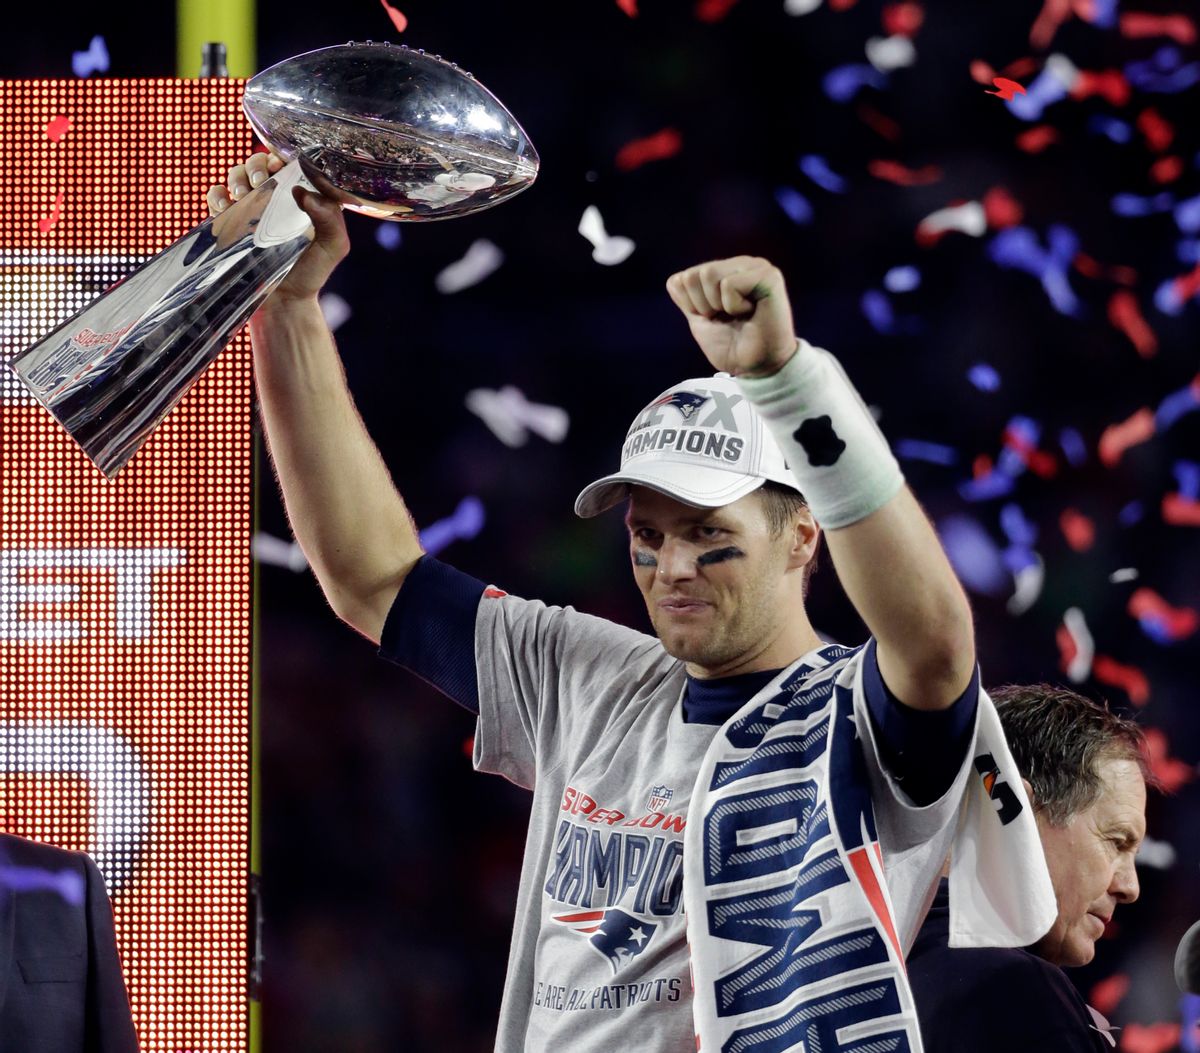 FILE - In a Feb. 1, 2015, file photo New England Patriots quarterback Tom Brady holds up the Vince Lombardi Trophy after the Patriots defeated the Seattle Seahawks 28-24 in NFL Super Bowl XLIX in Glendale, Ariz.   The NFL Monday, May 11, 2015, suspended Super Bowl MVP   Brady for the first four games of the season. (AP Photo/Mark Humphrey) (AP)